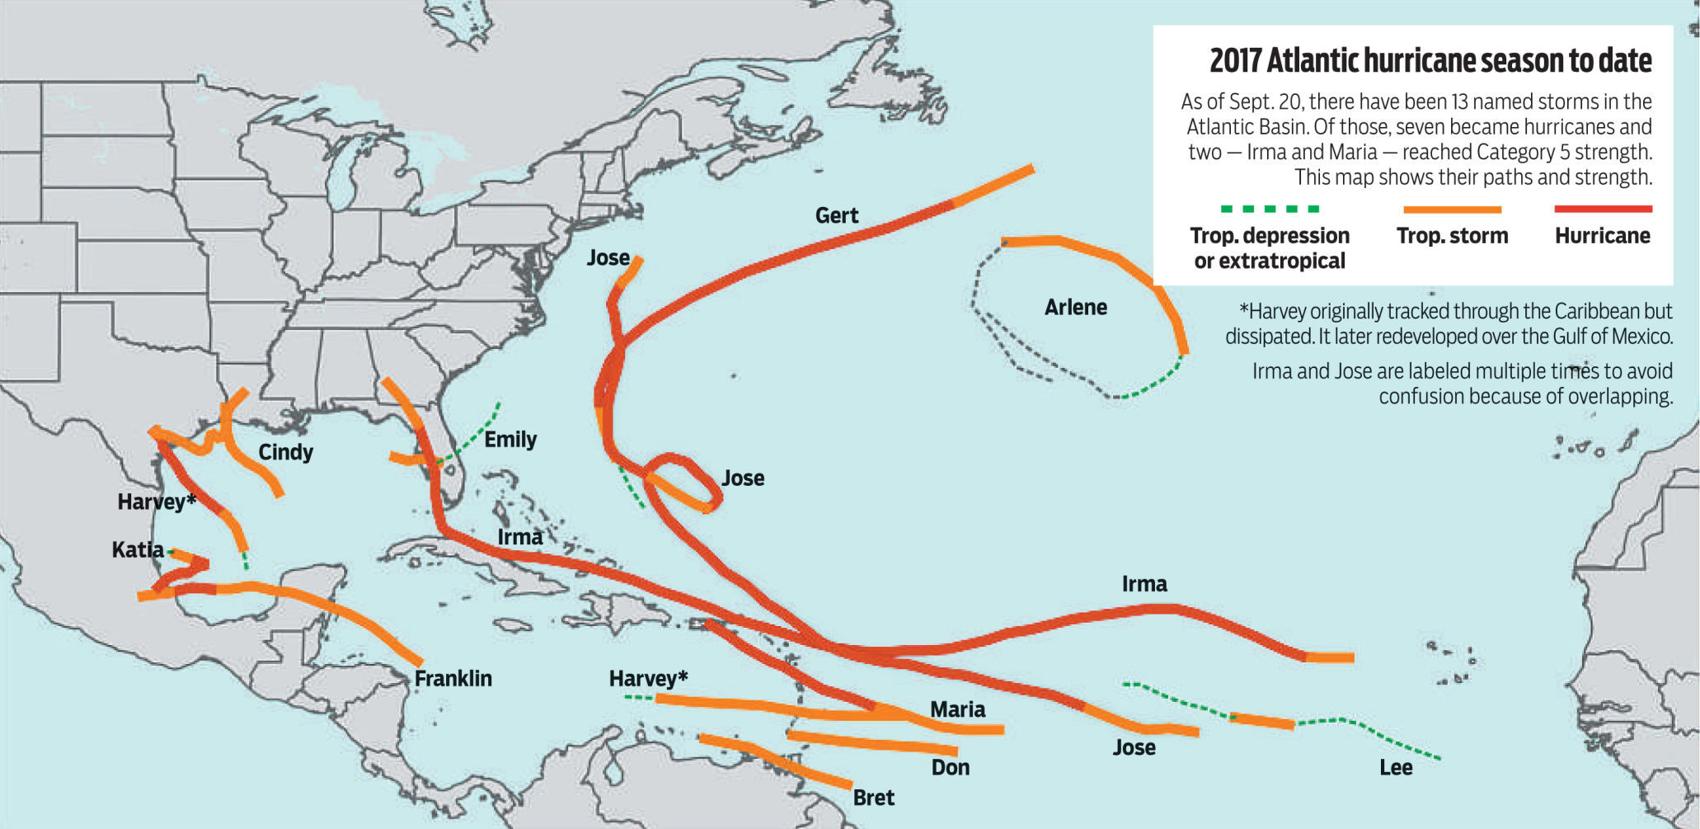 These maps help explain where and how powerful hurricanes have been in the Atlantic in 2017